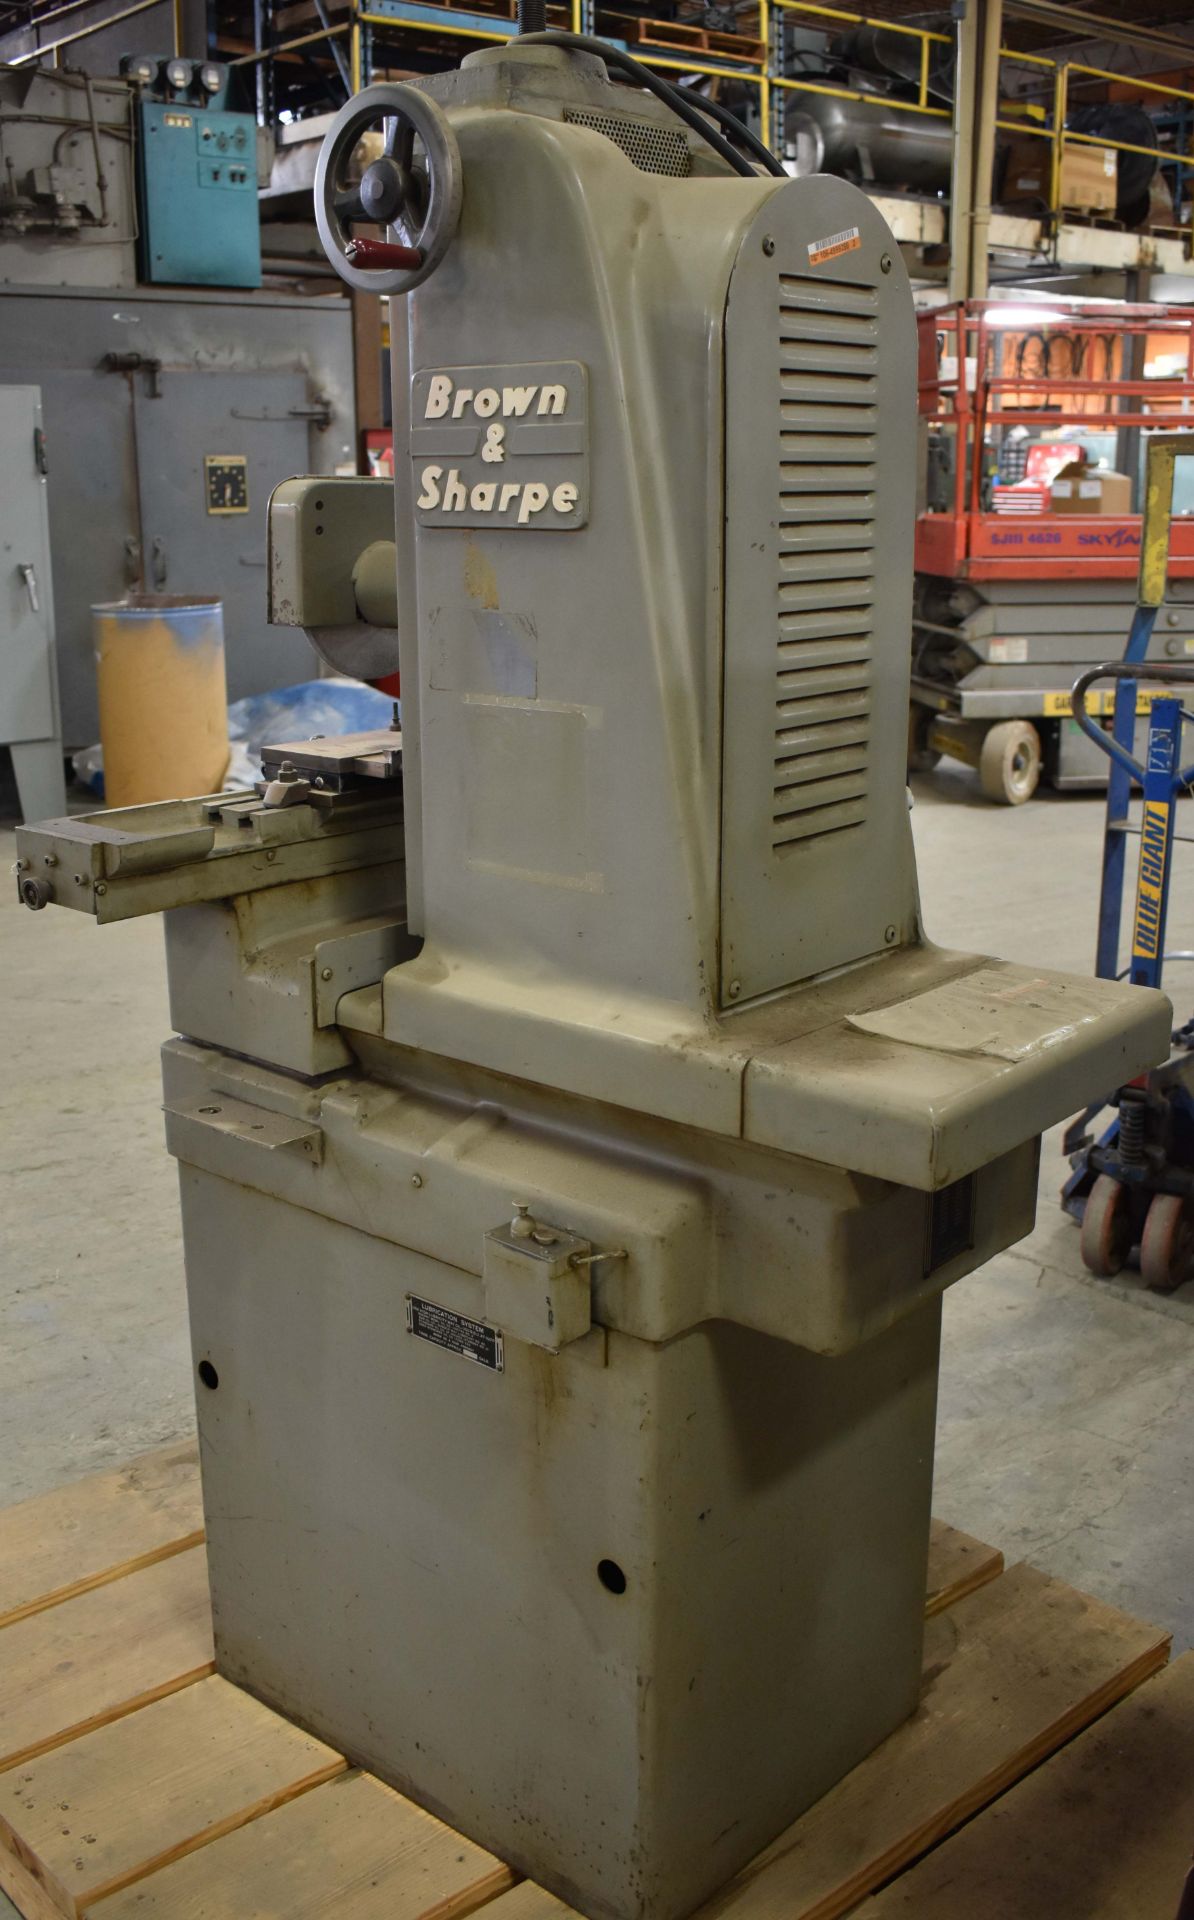 BROWN & SHARPE 510 MANUAL SURFACE GRINDER WITH 10"X5" MAGNETIC CHUCK, 7" WHEEL, S/N: 523-510-717 ( - Image 4 of 5